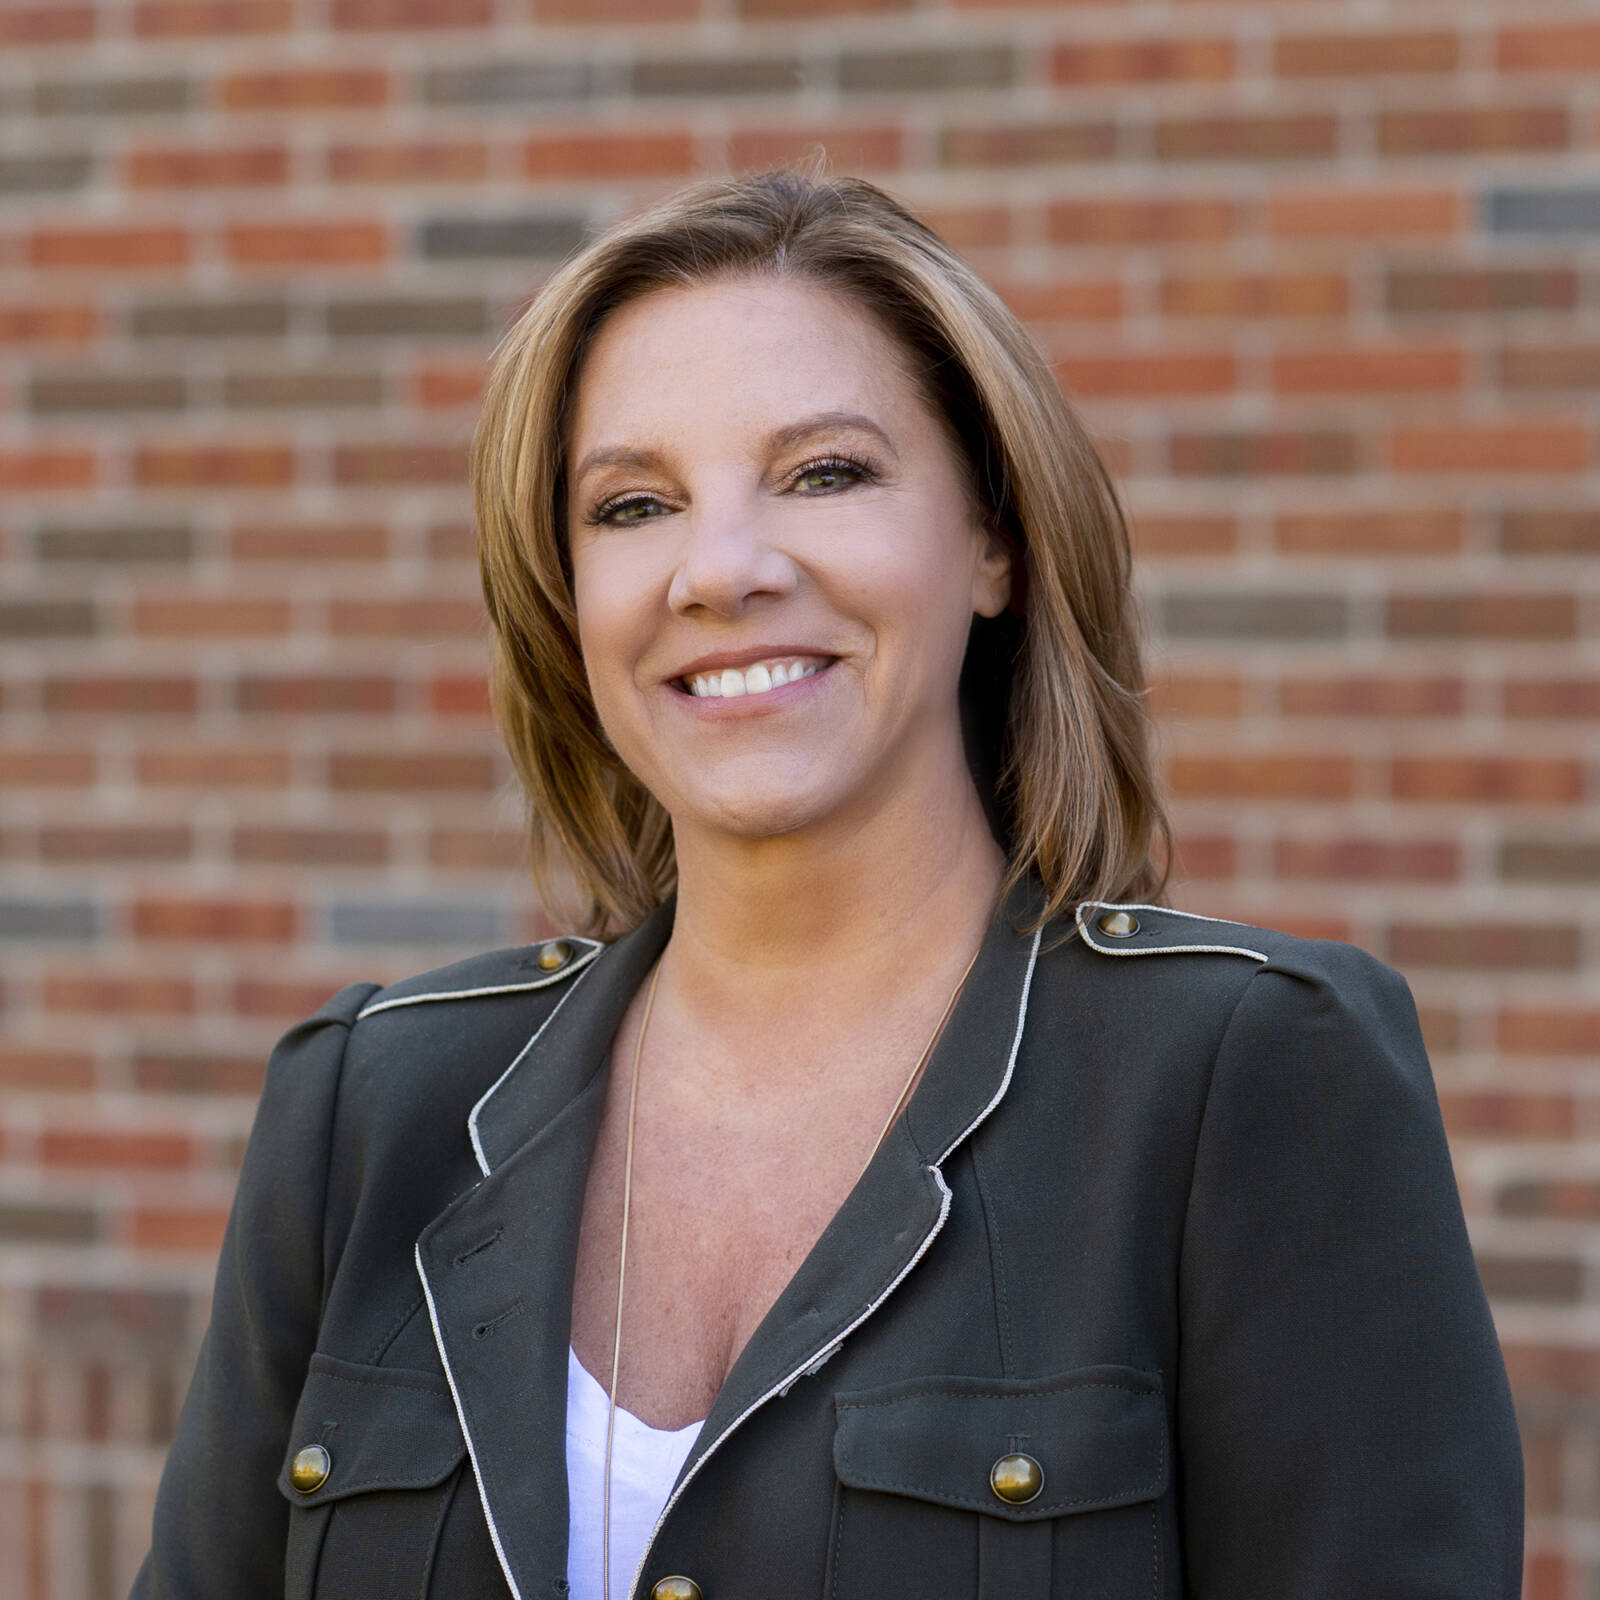 smiling business woman headshot with brick wall backdrop